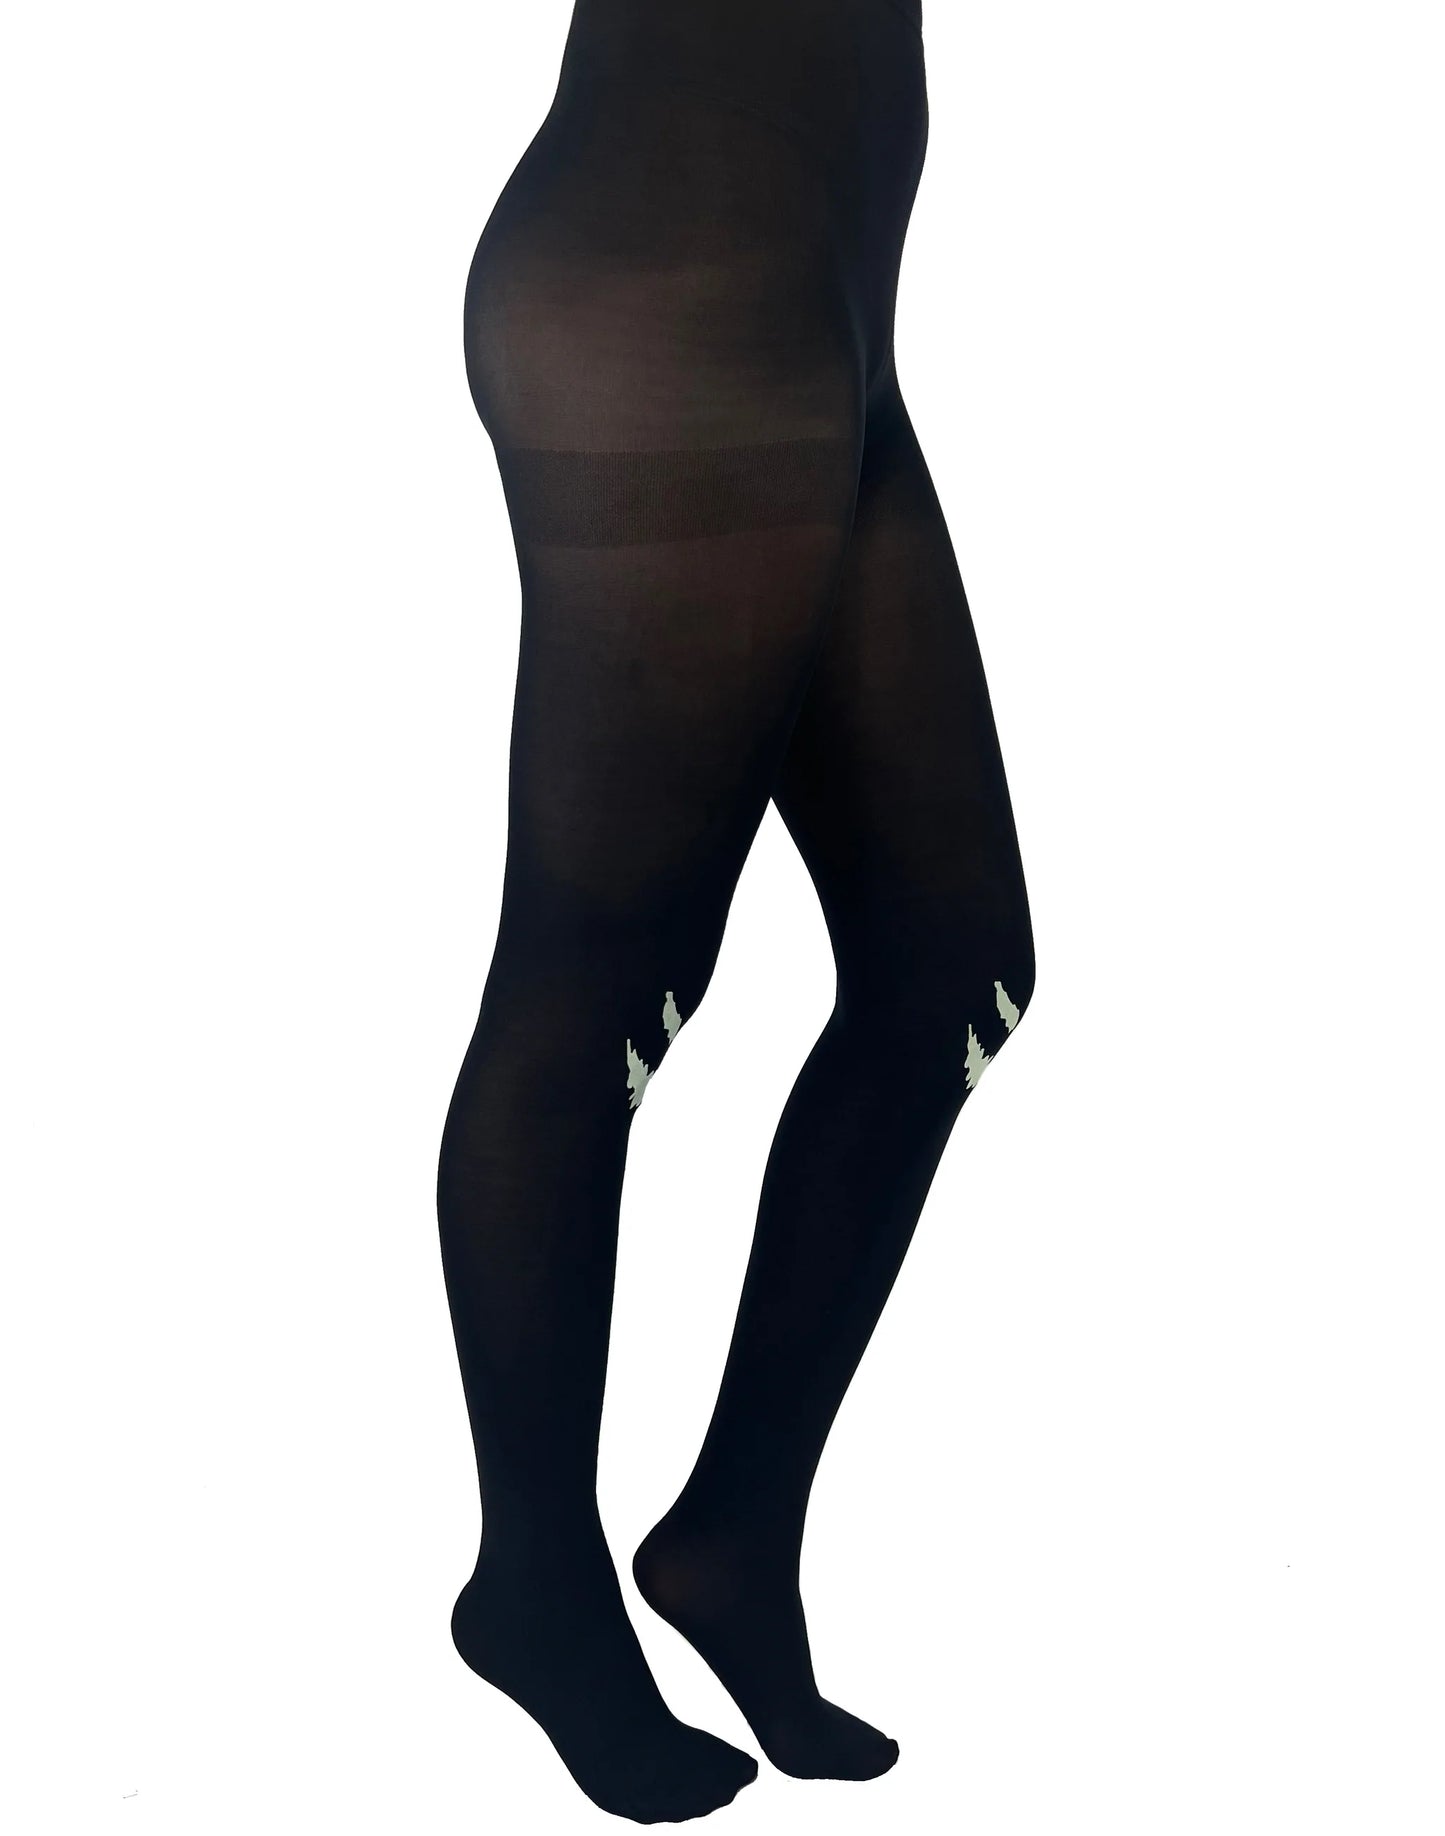 Pamela Mann Spooky Face Tights - Black opaque tights with a glow in the dark Jack-o'-lantern style face on the knees, perfect for Halloween.